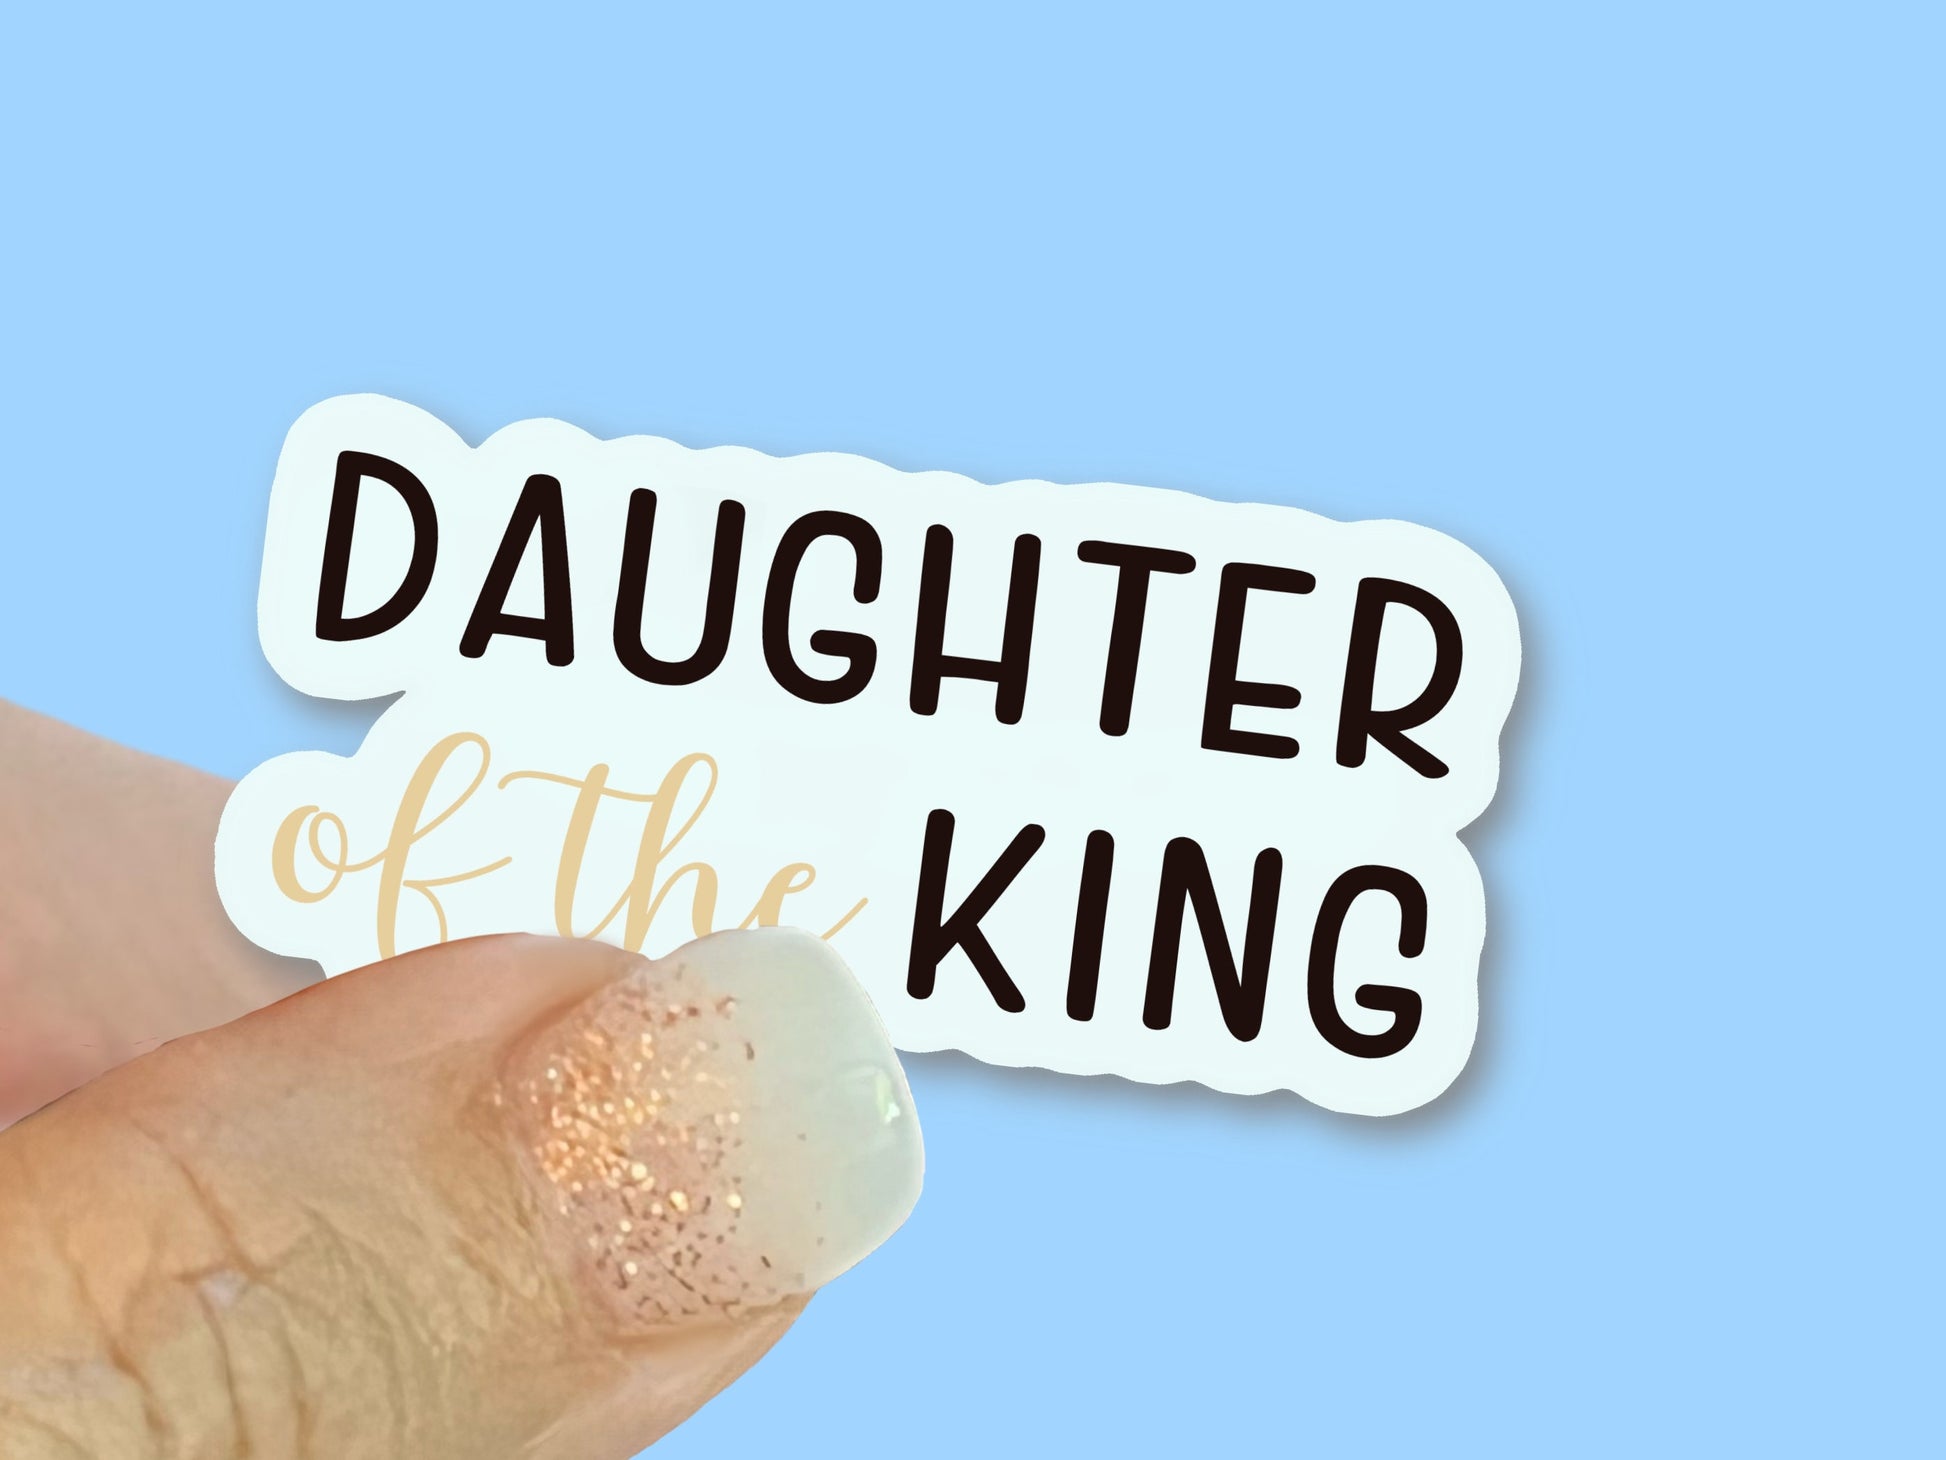 Daughter of the King - Christian Faith UV/ Waterproof Vinyl Sticker/ Decal- Choice of Size, Single or Bulk qty